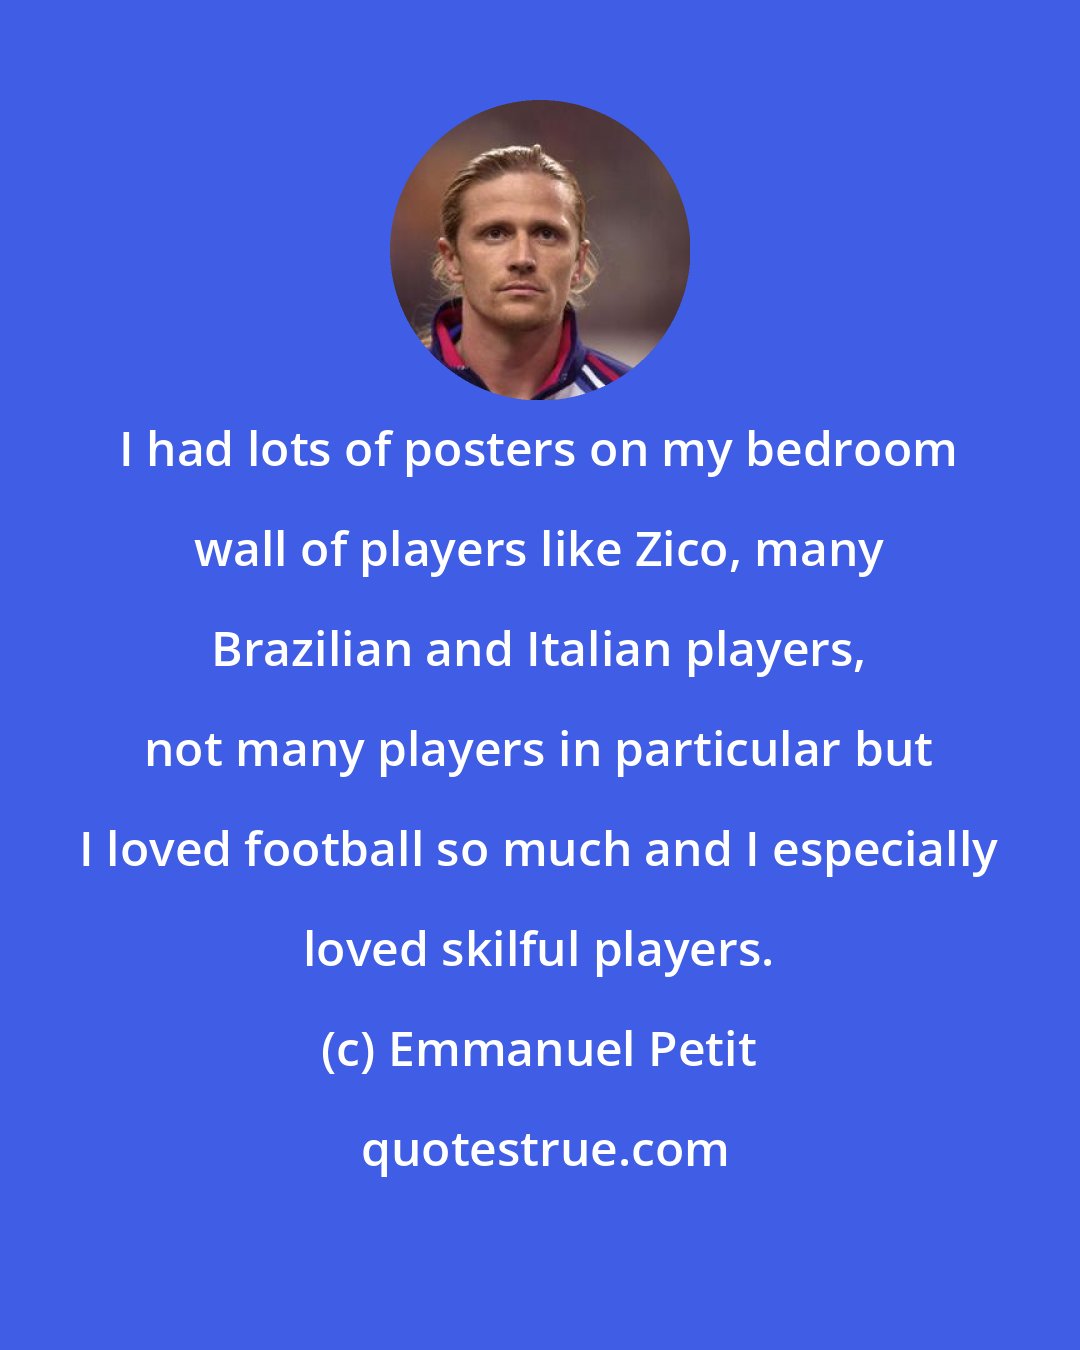 Emmanuel Petit: I had lots of posters on my bedroom wall of players like Zico, many Brazilian and Italian players, not many players in particular but I loved football so much and I especially loved skilful players.